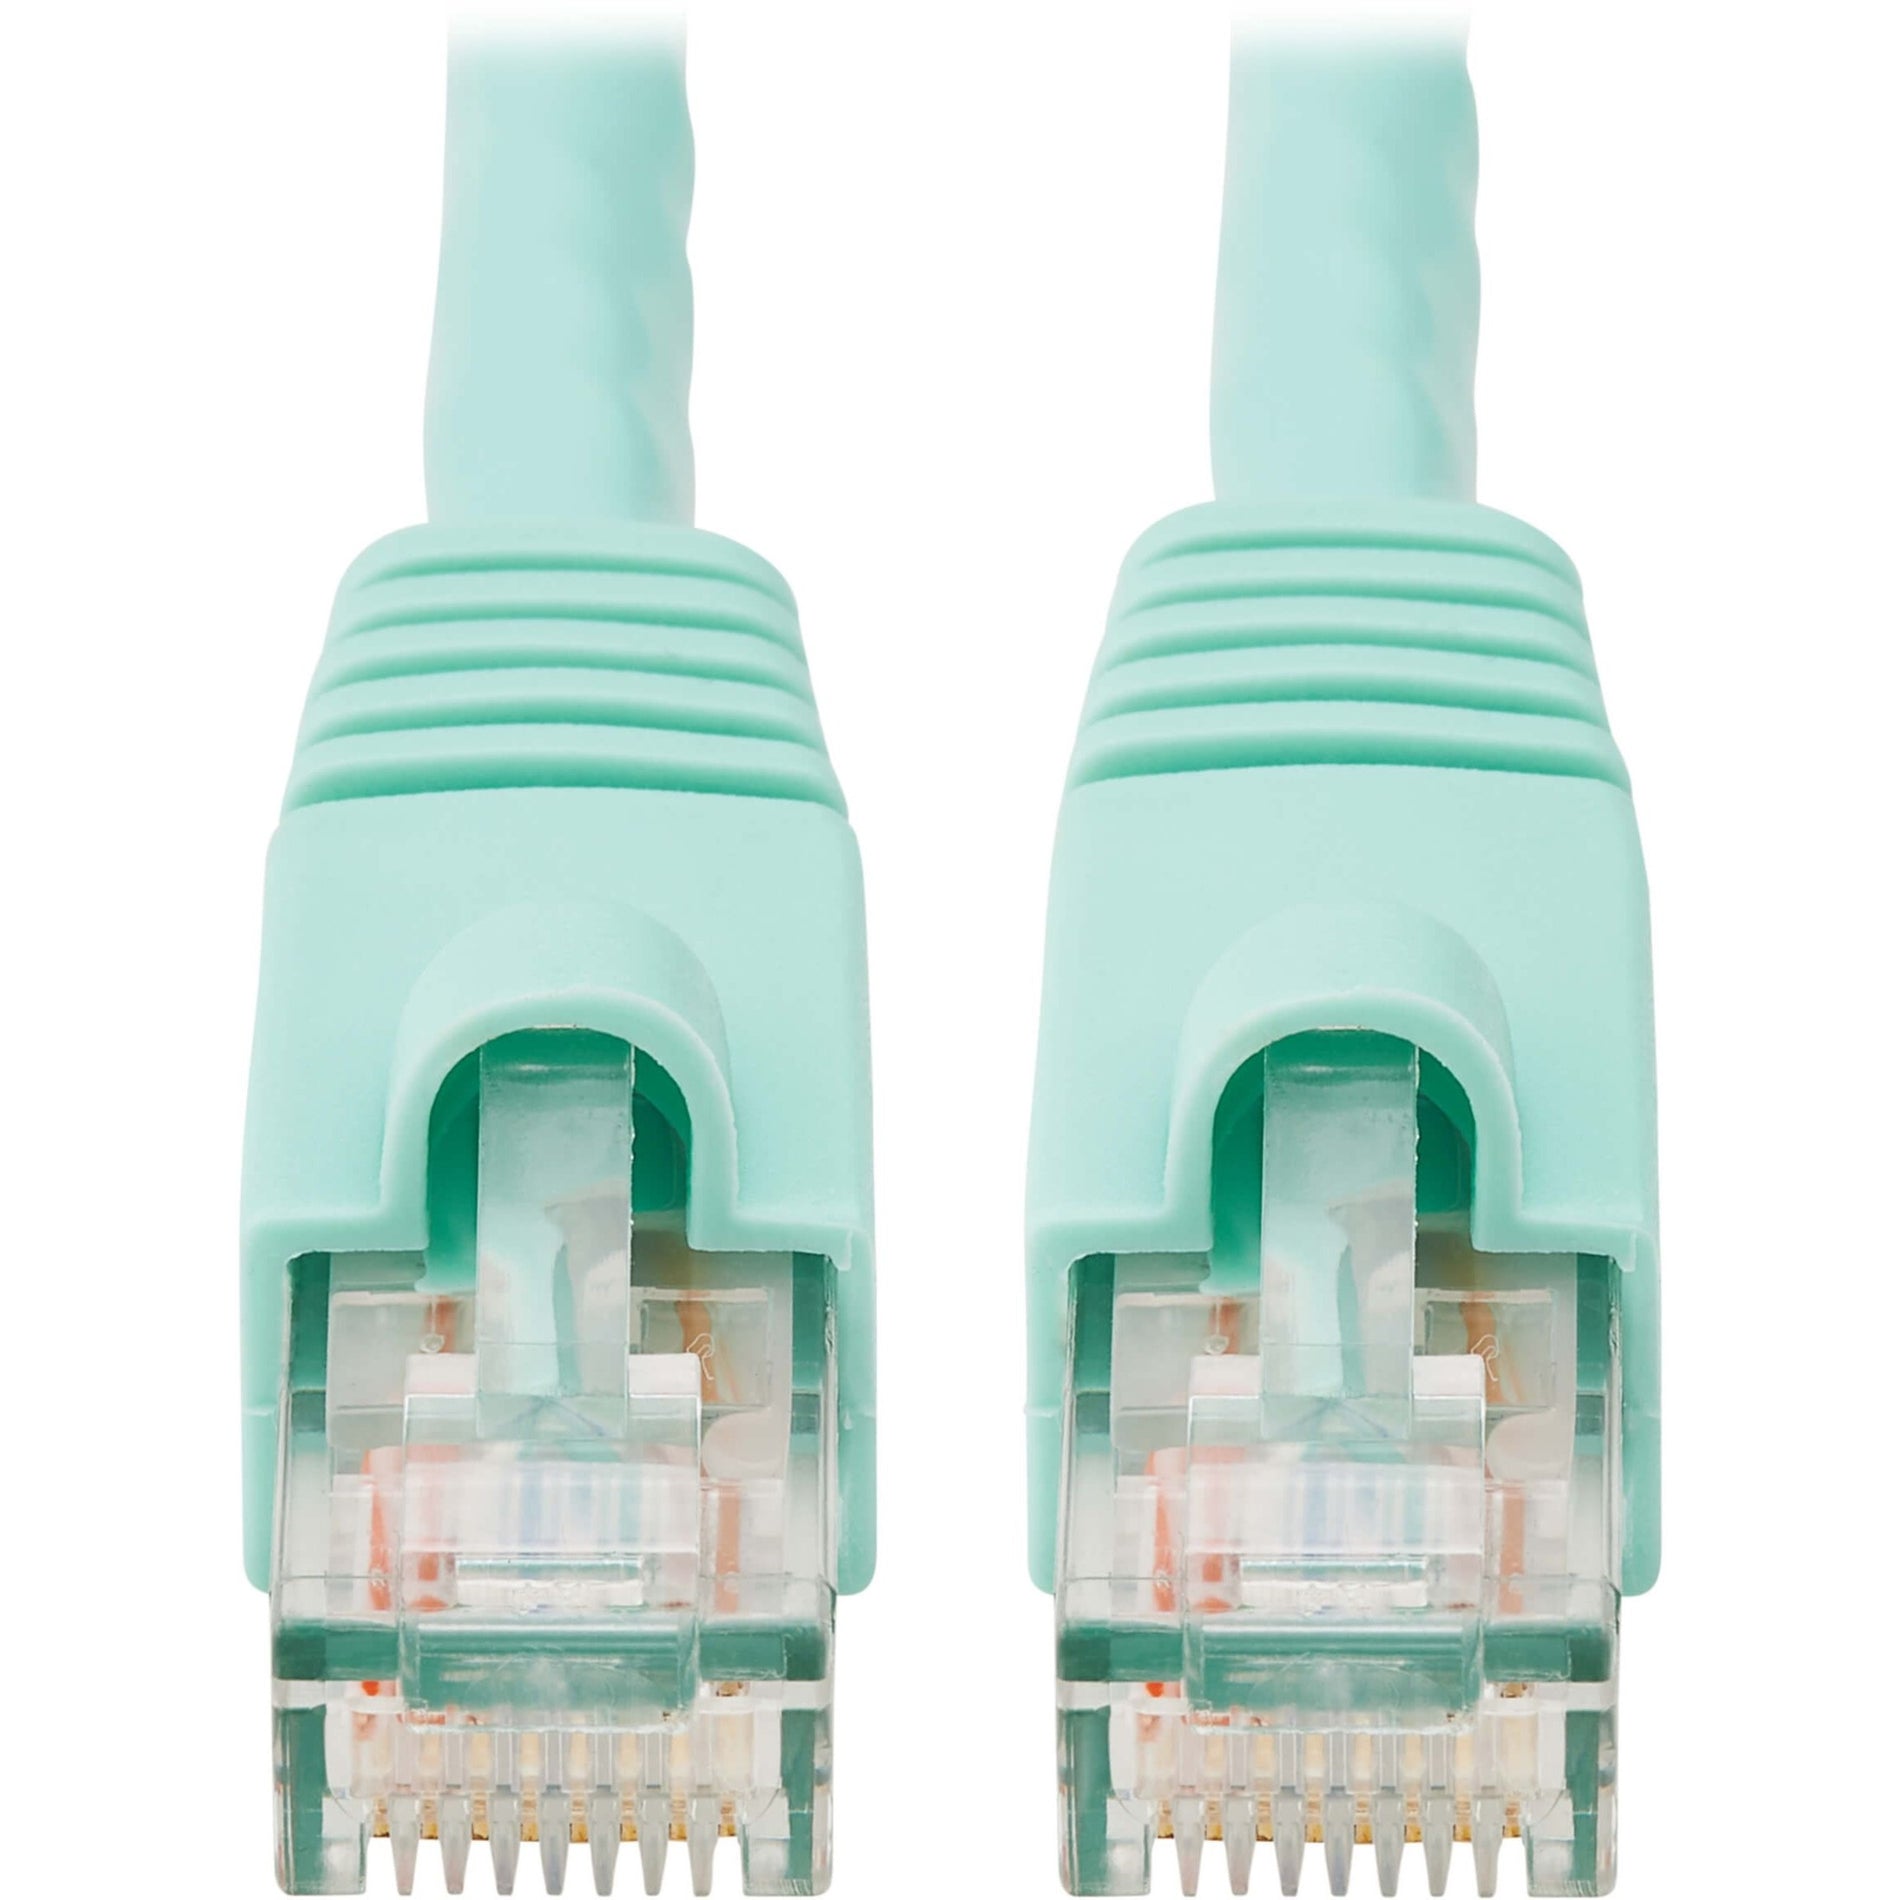 Tripp Lite by Eaton (N261-020-AQ) Connector Cable